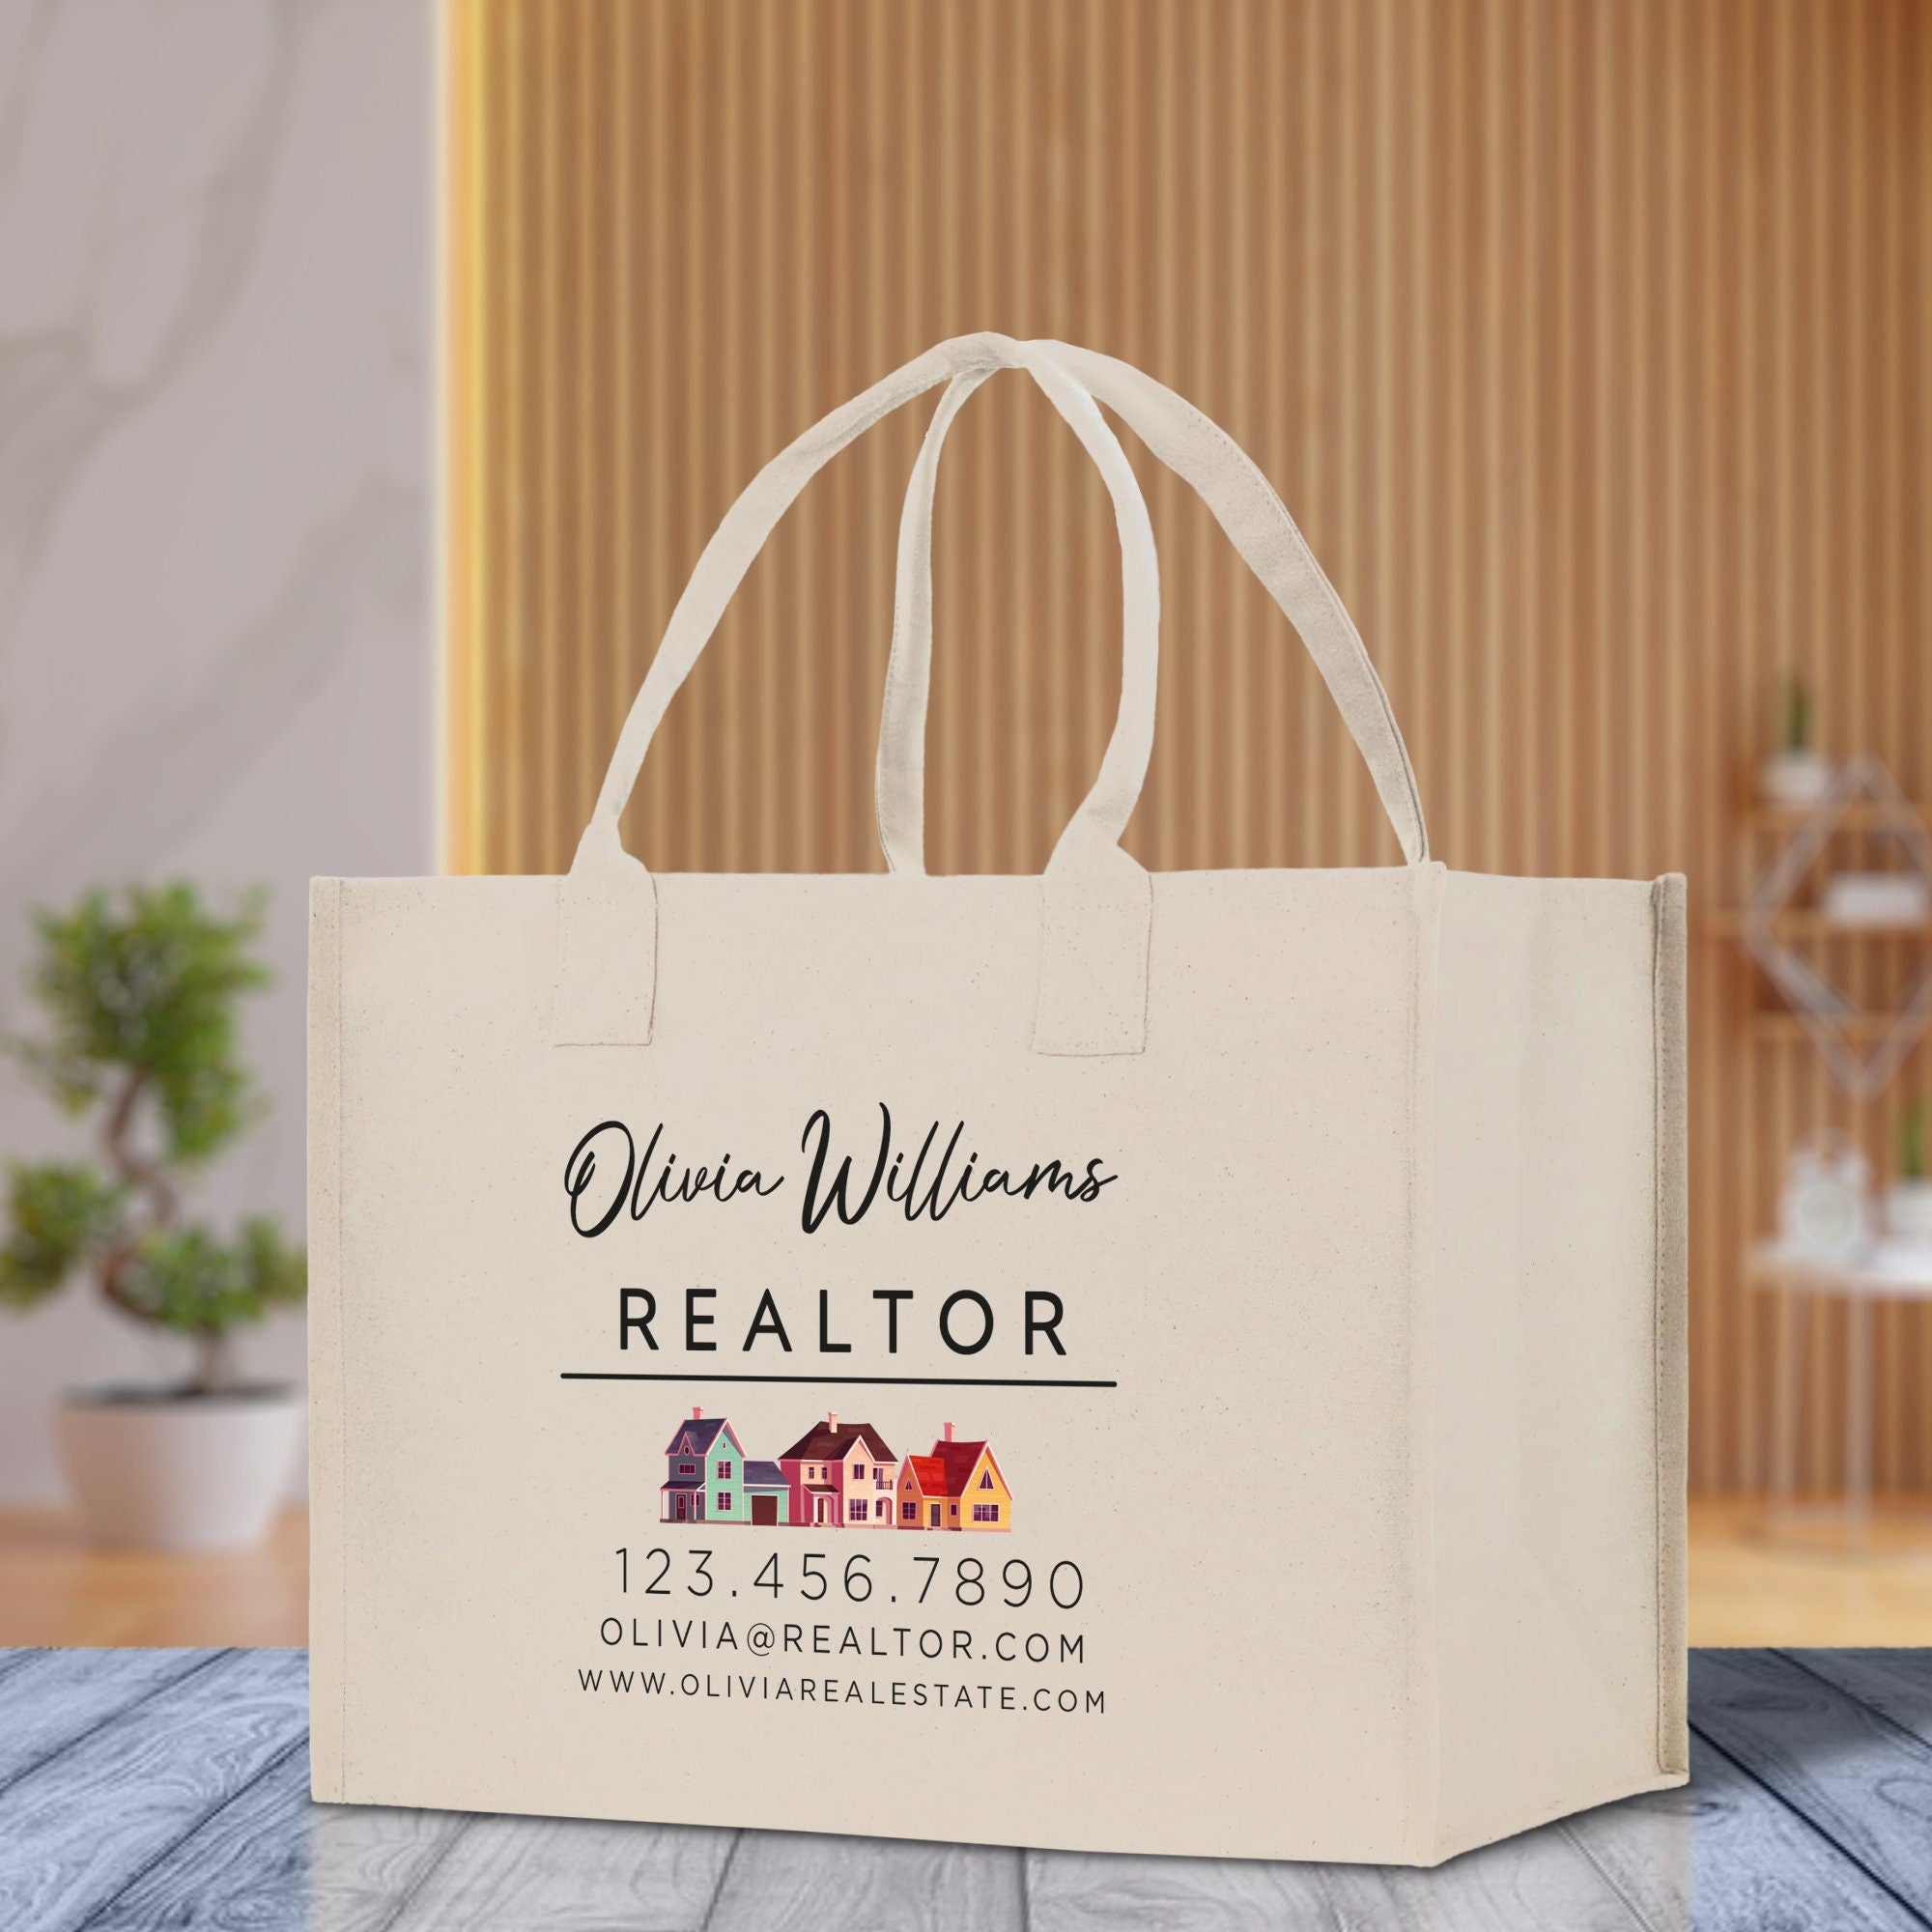 a paper bag with a realtor logo on it